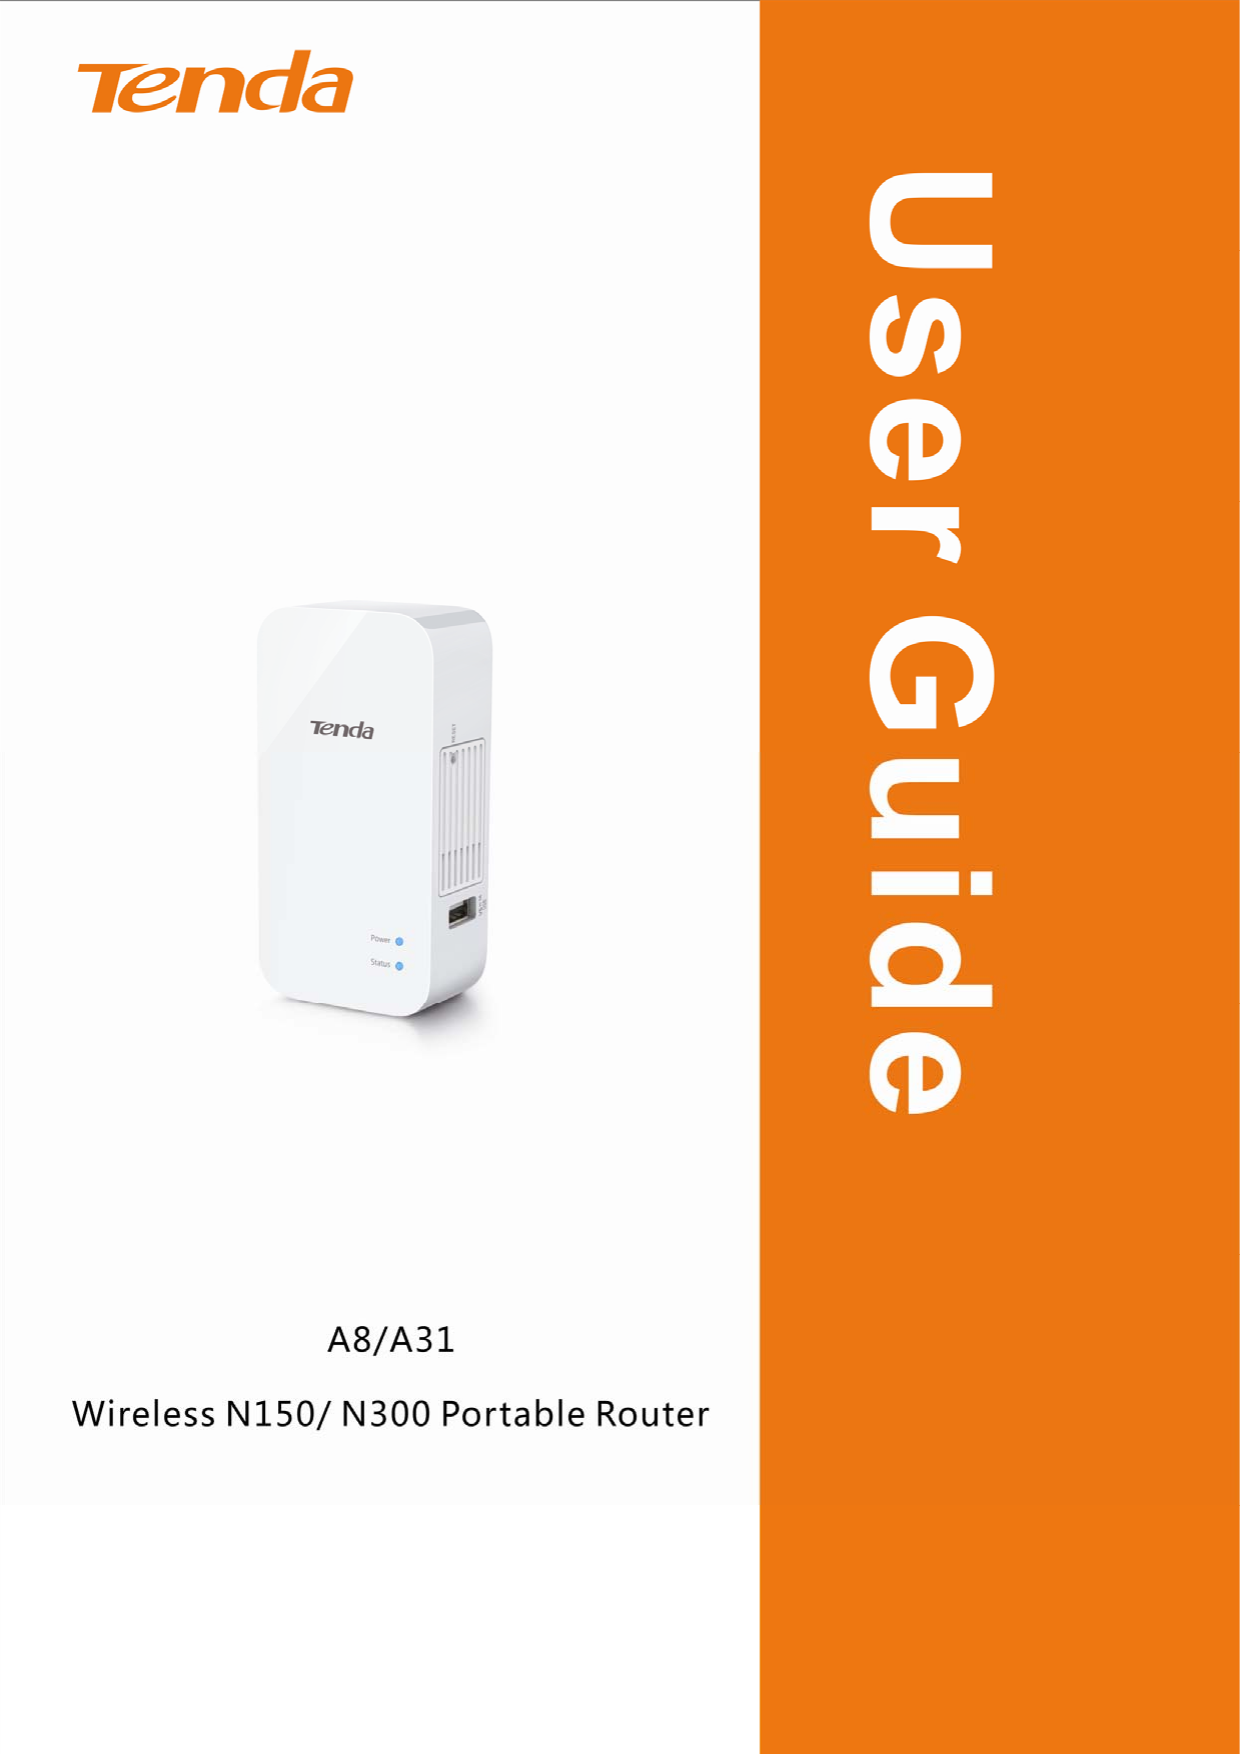                                      Wireless N150/N300 Portable Router                 I 